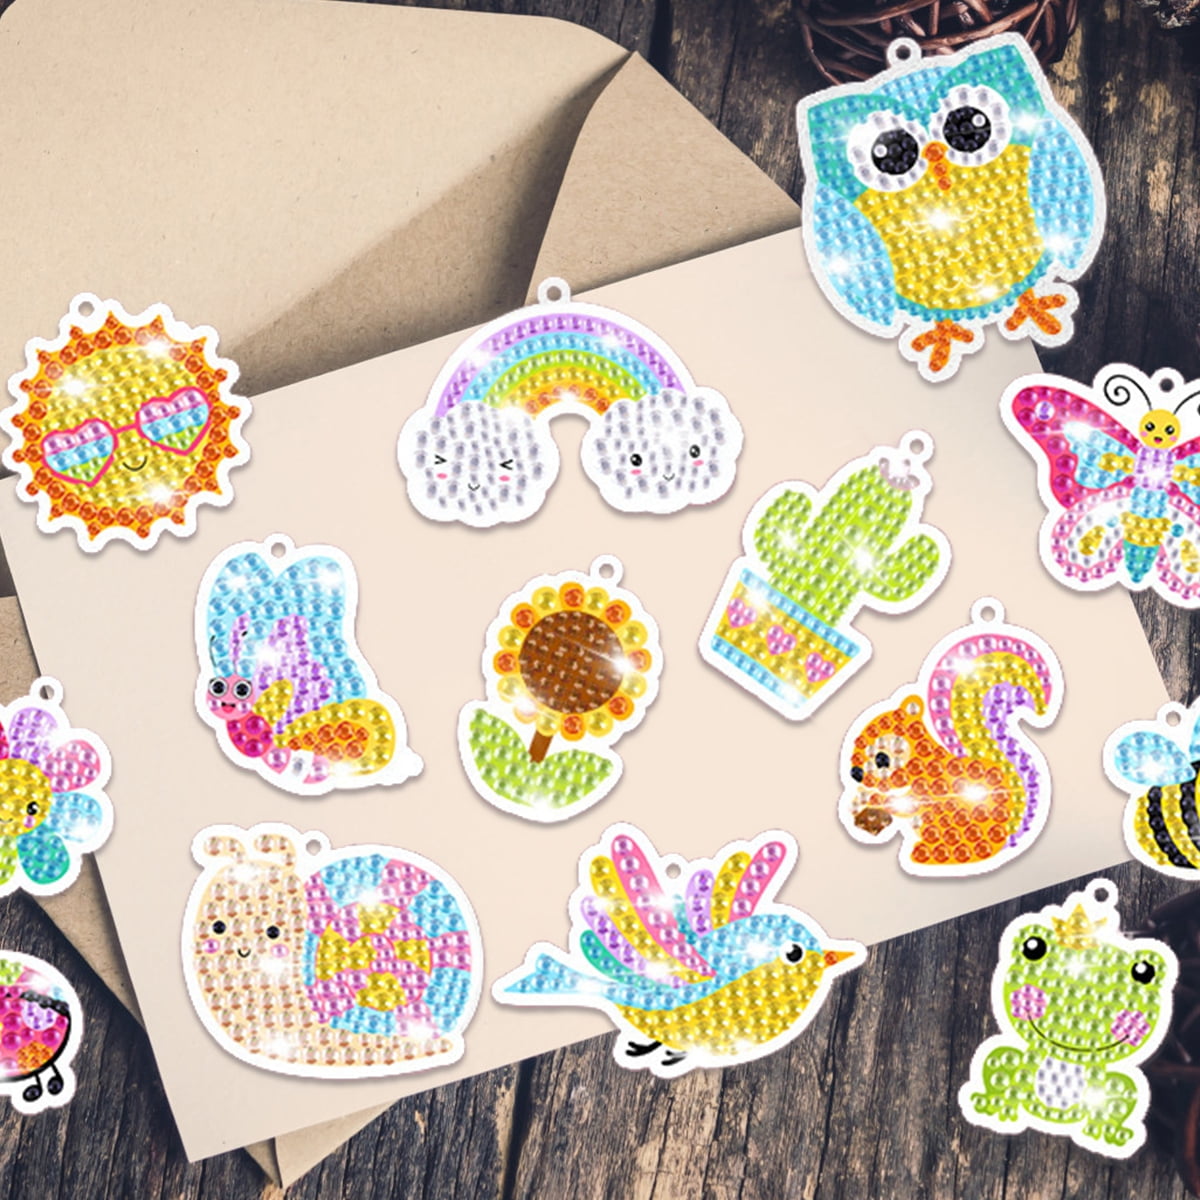 Dropship 5D Diamond Painting Stickers Kits For Kids Arts And Crafts,  Cartoon Stickers Stick Paint With Diamonds By Numbers, 15Pcs Cute Garden  Animals Series, Easy To DIY to Sell Online at a